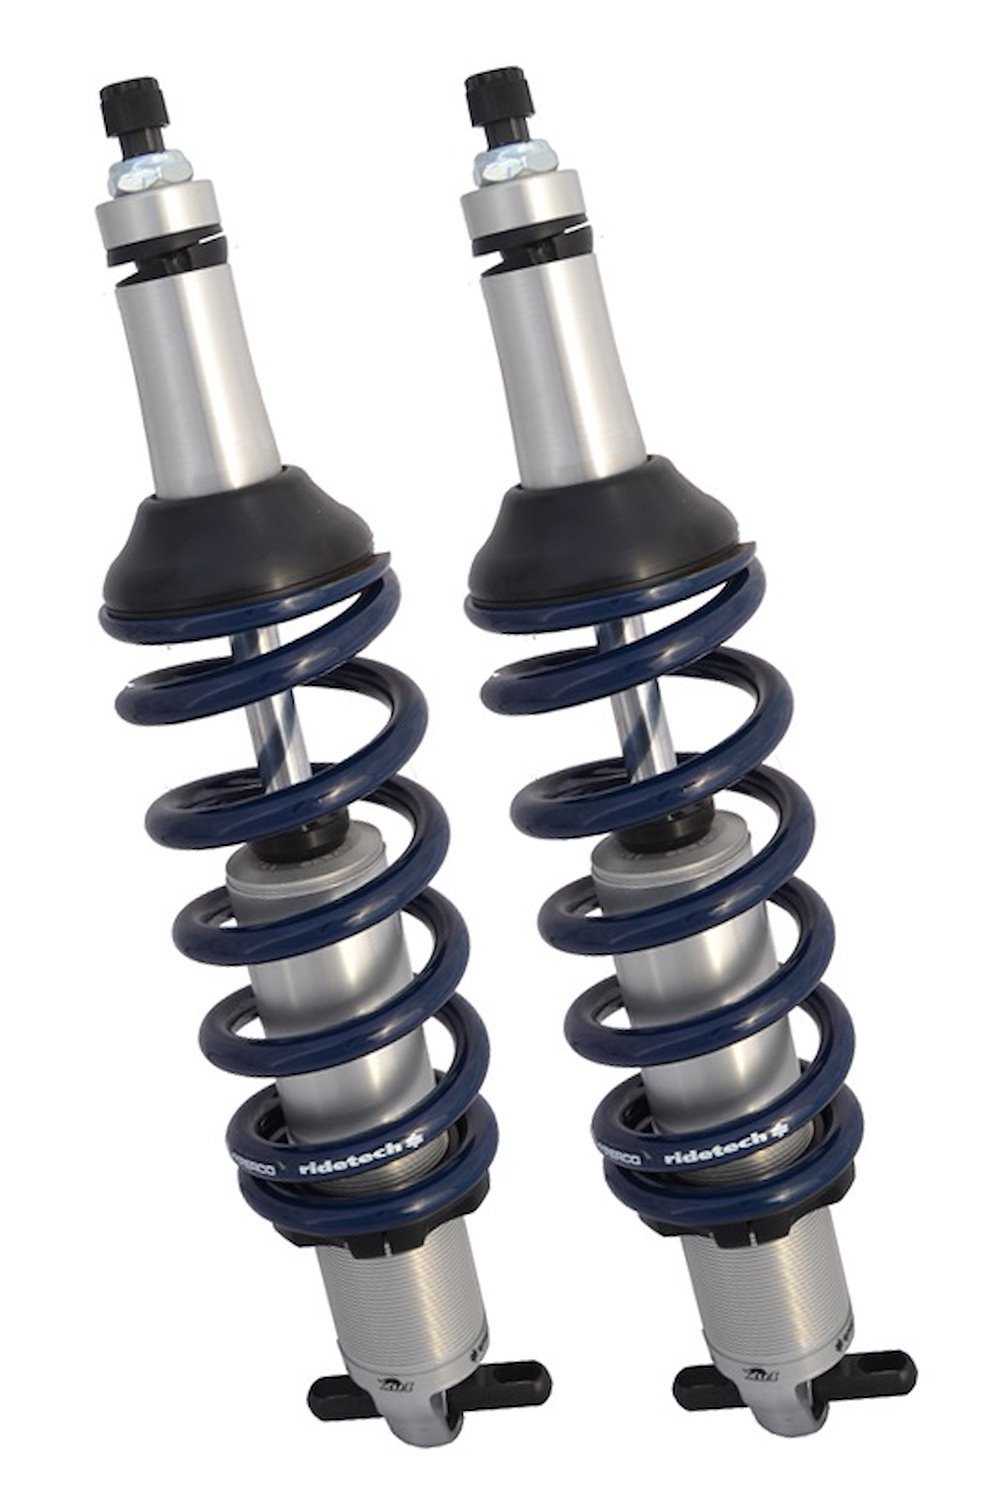 HQ Series front CoilOvers for 97-13 Corvette. Sold as pair.